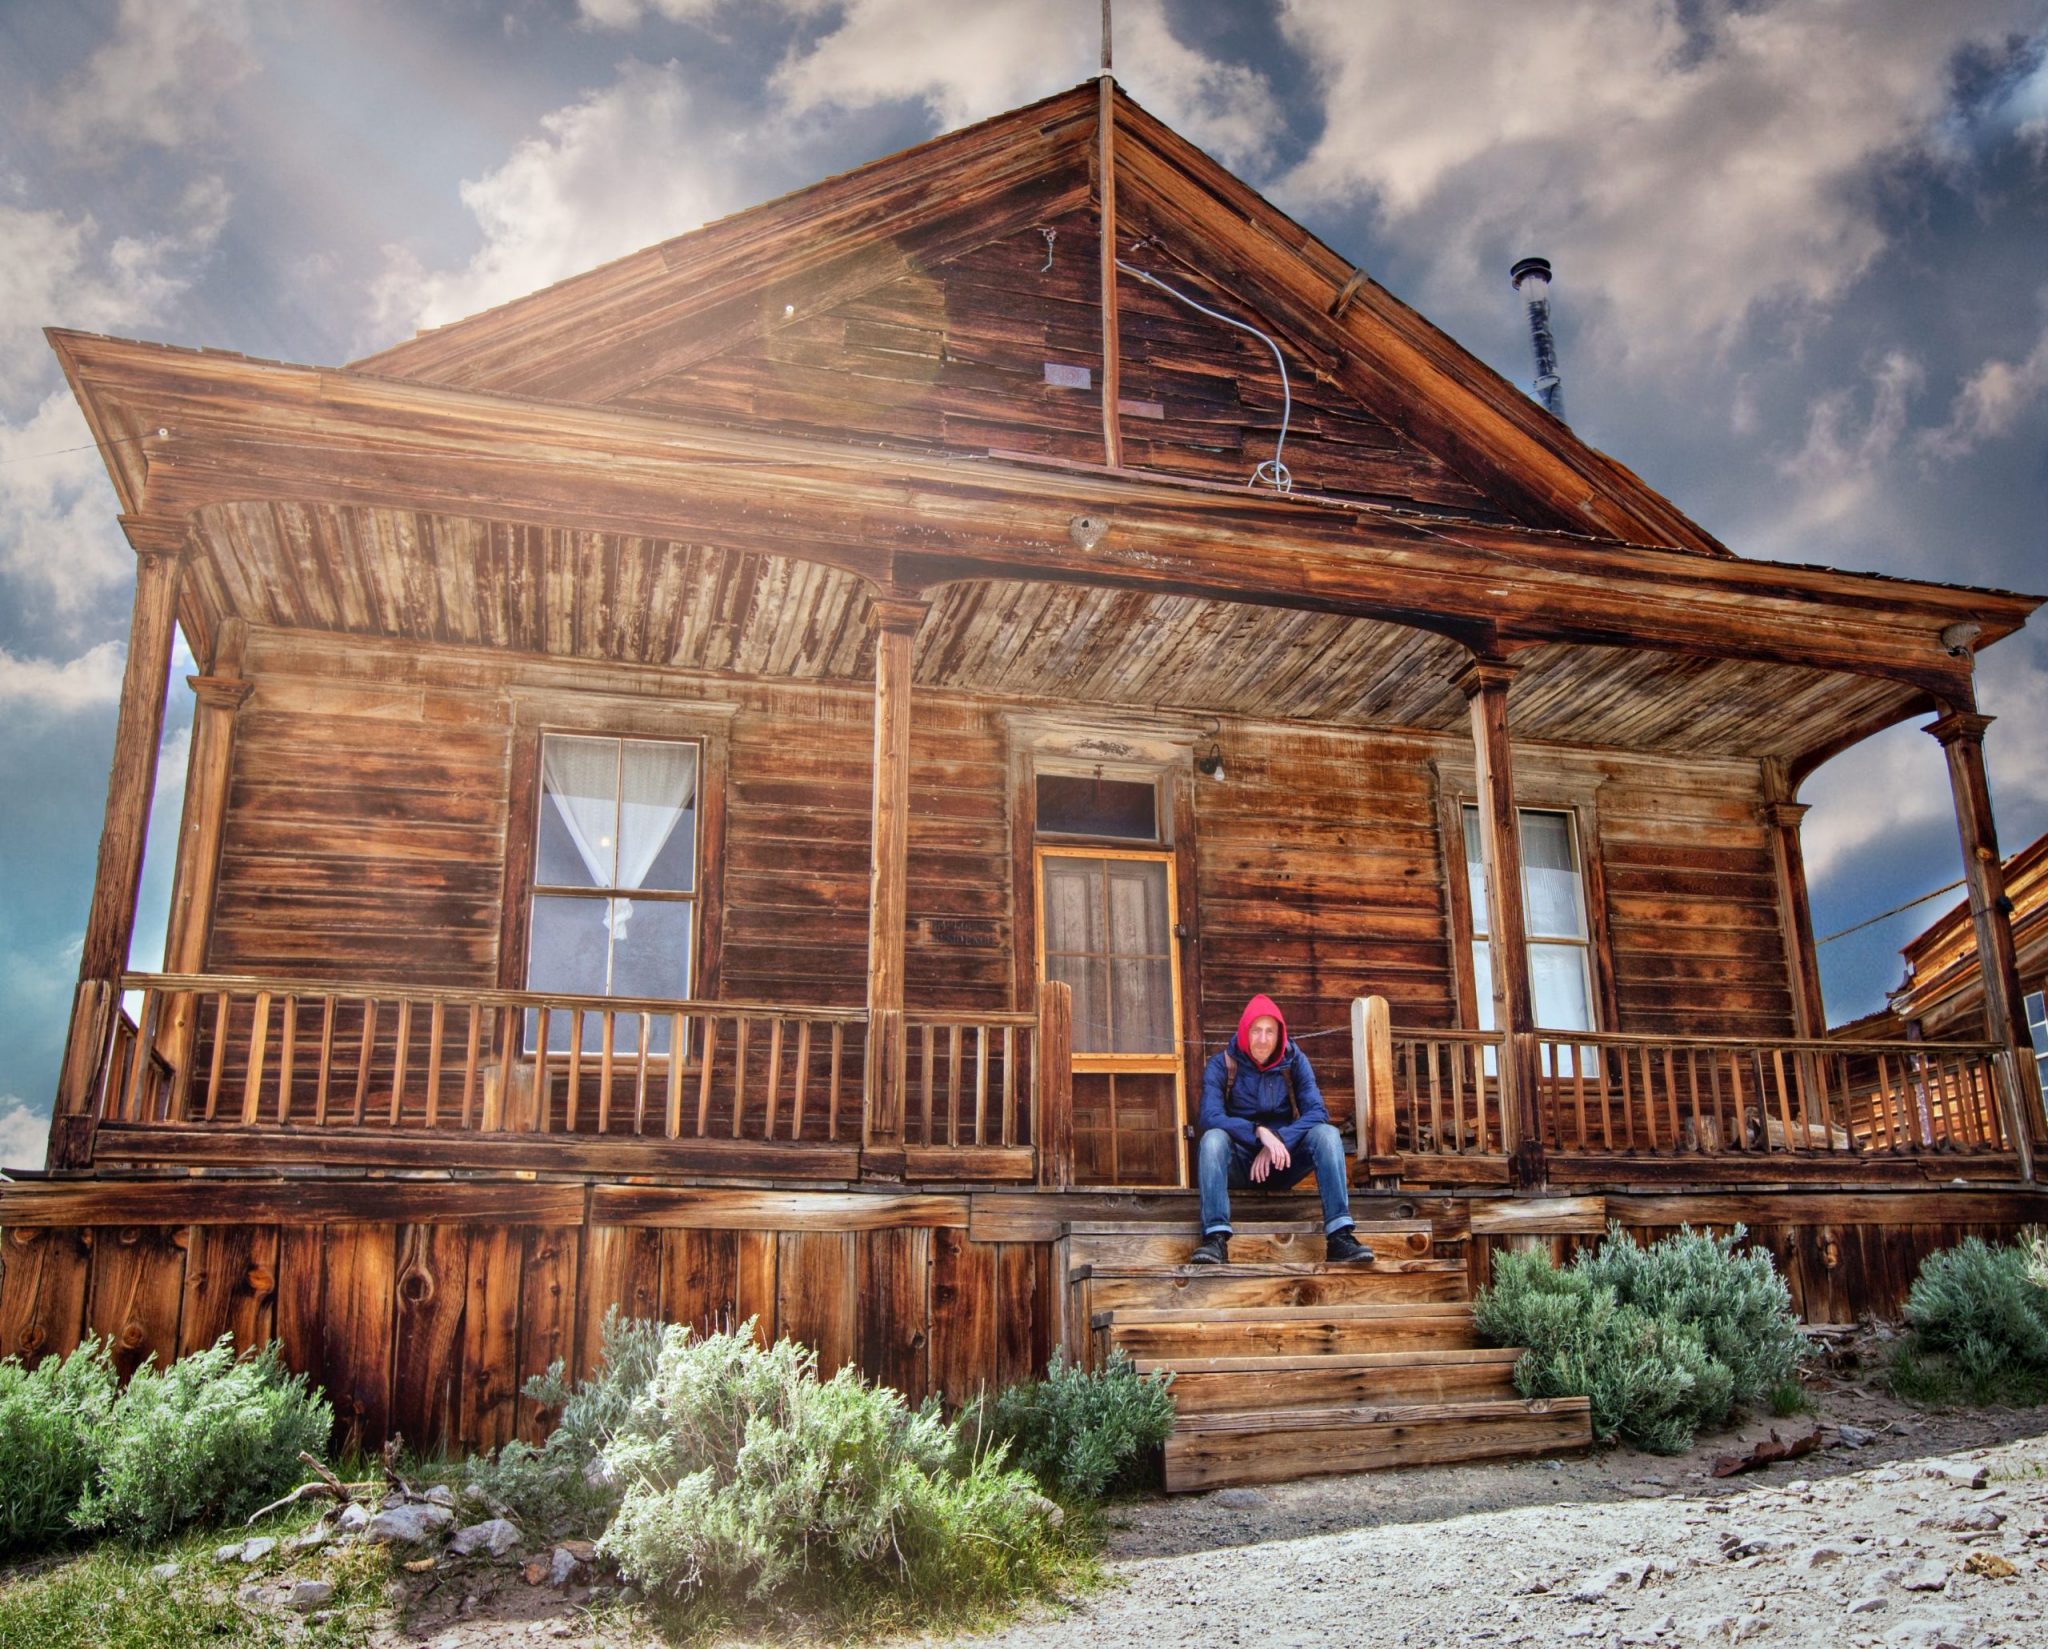 An old home in Bodie California Ghost Town